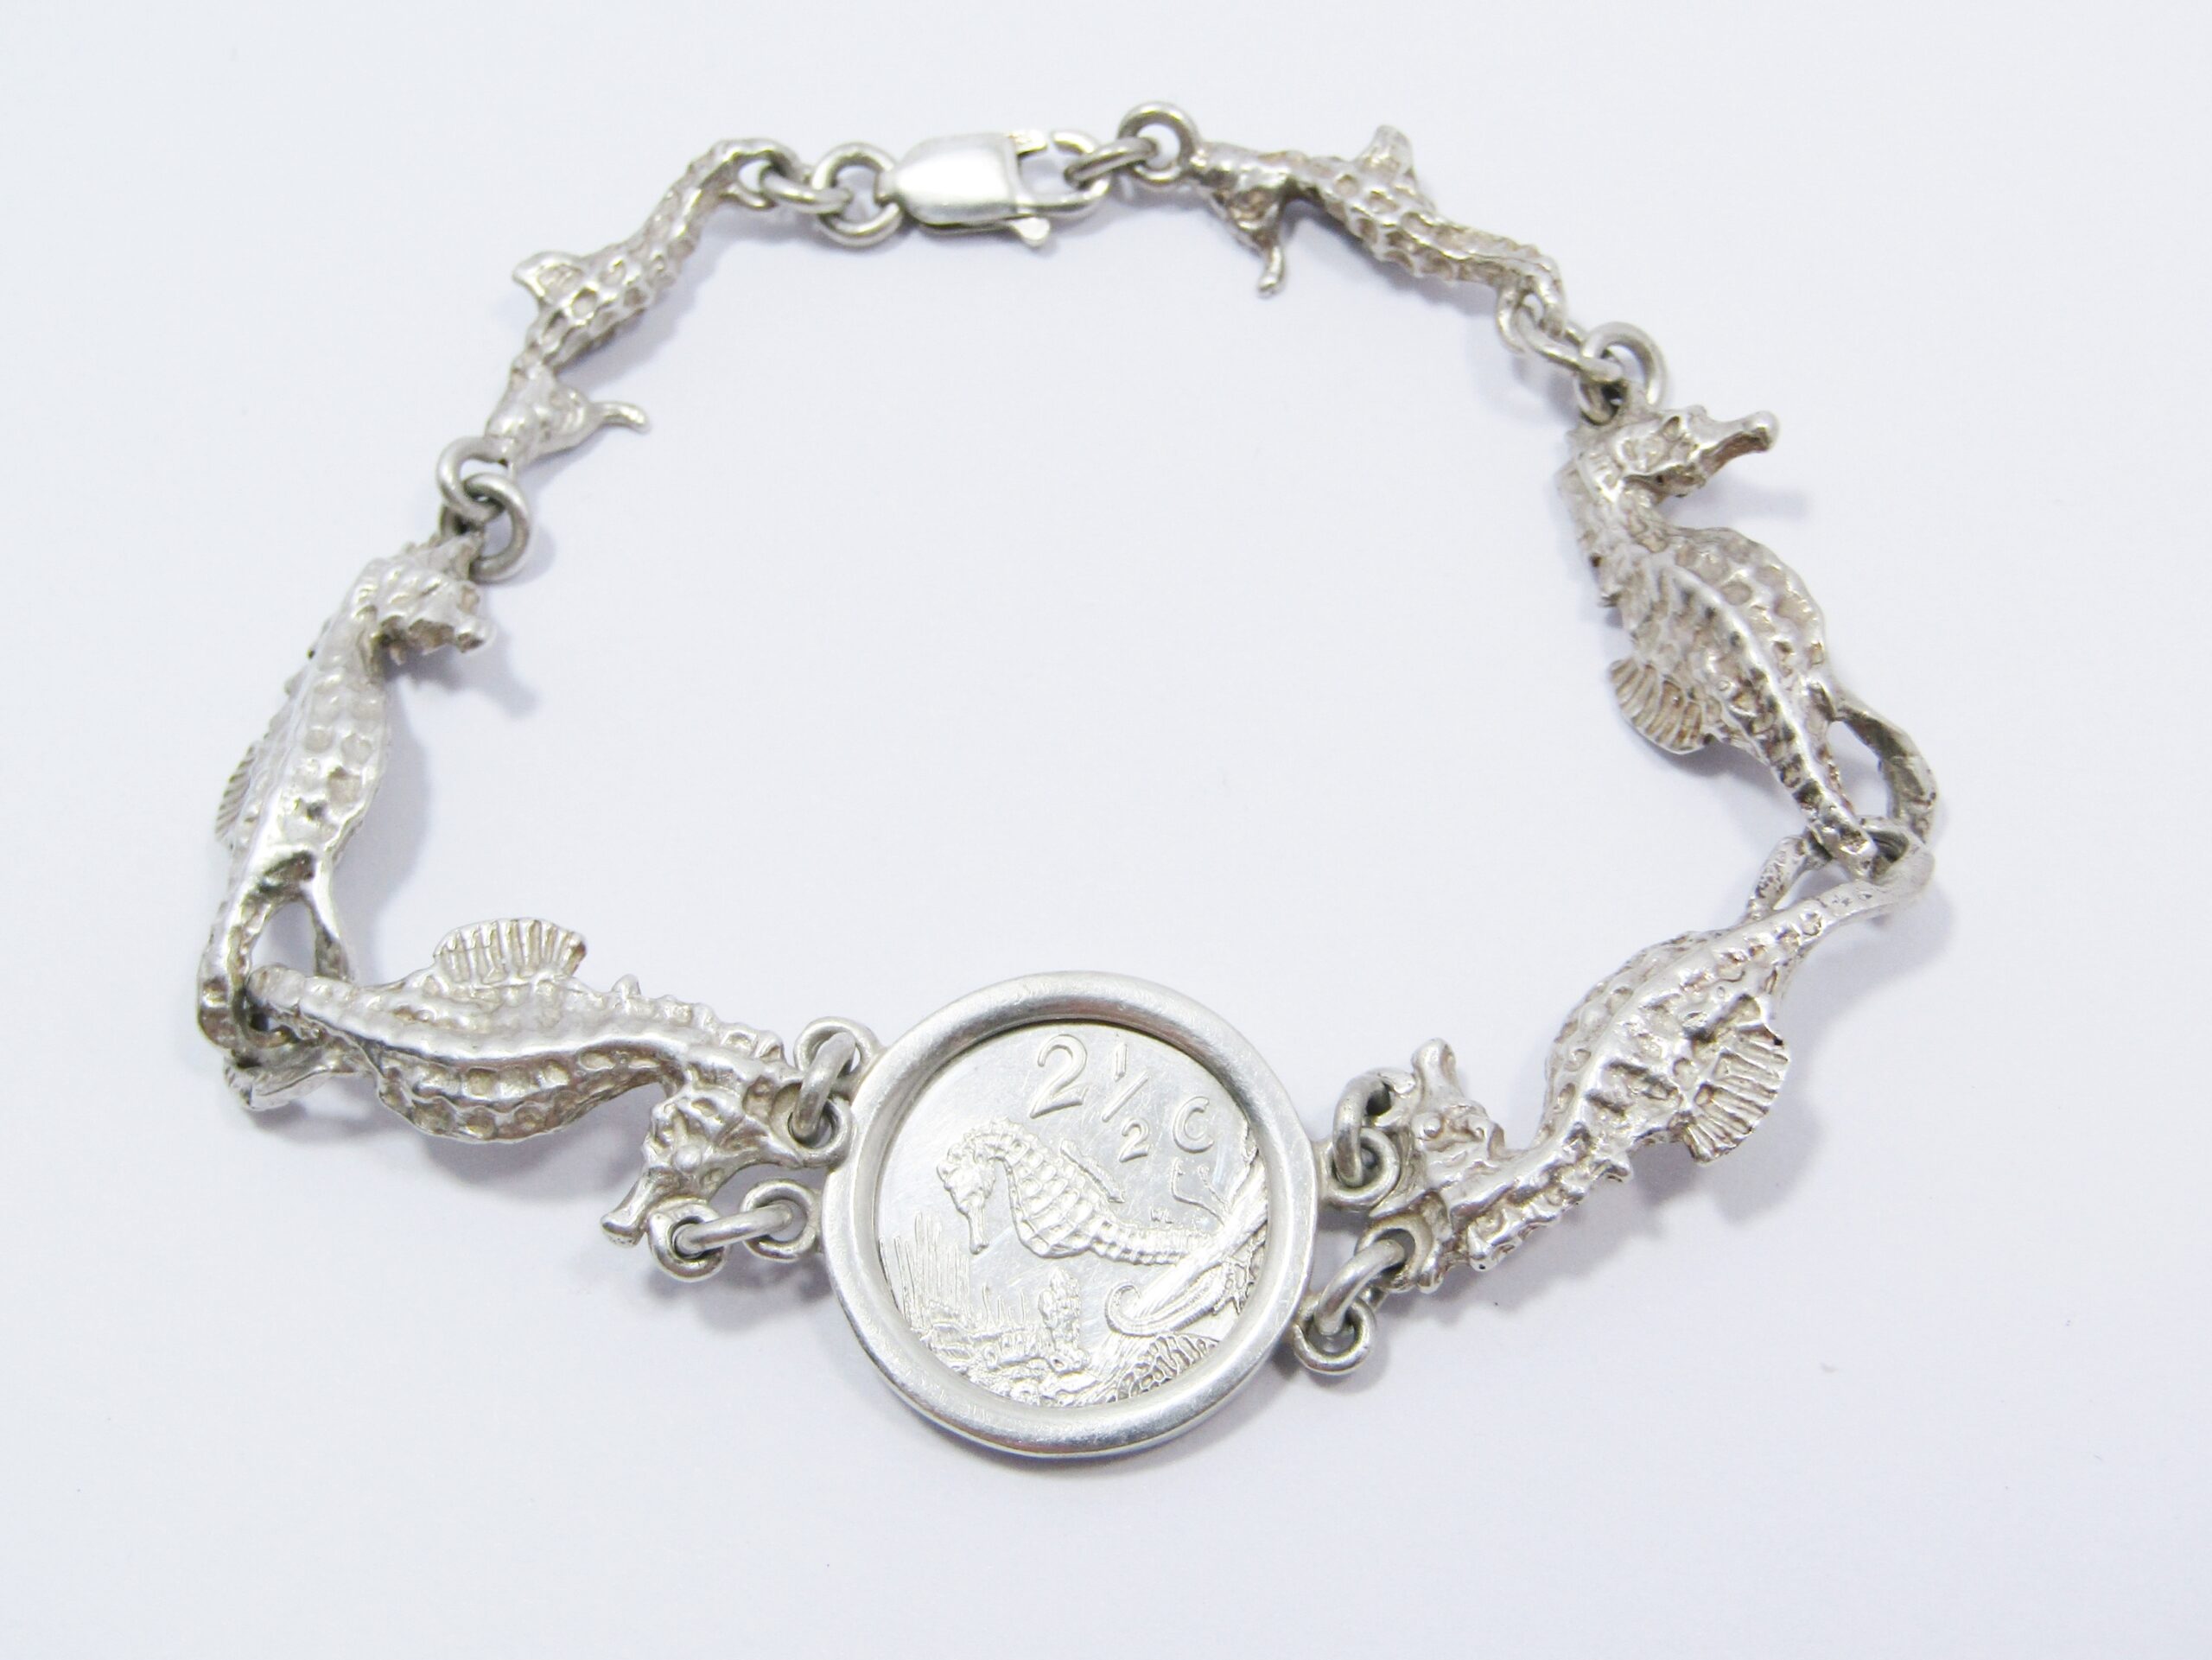 A Gorgeous Sea Horse Bracelet With a 1991 2 and a Half Cent Commemorative coin in Sterling Silver.